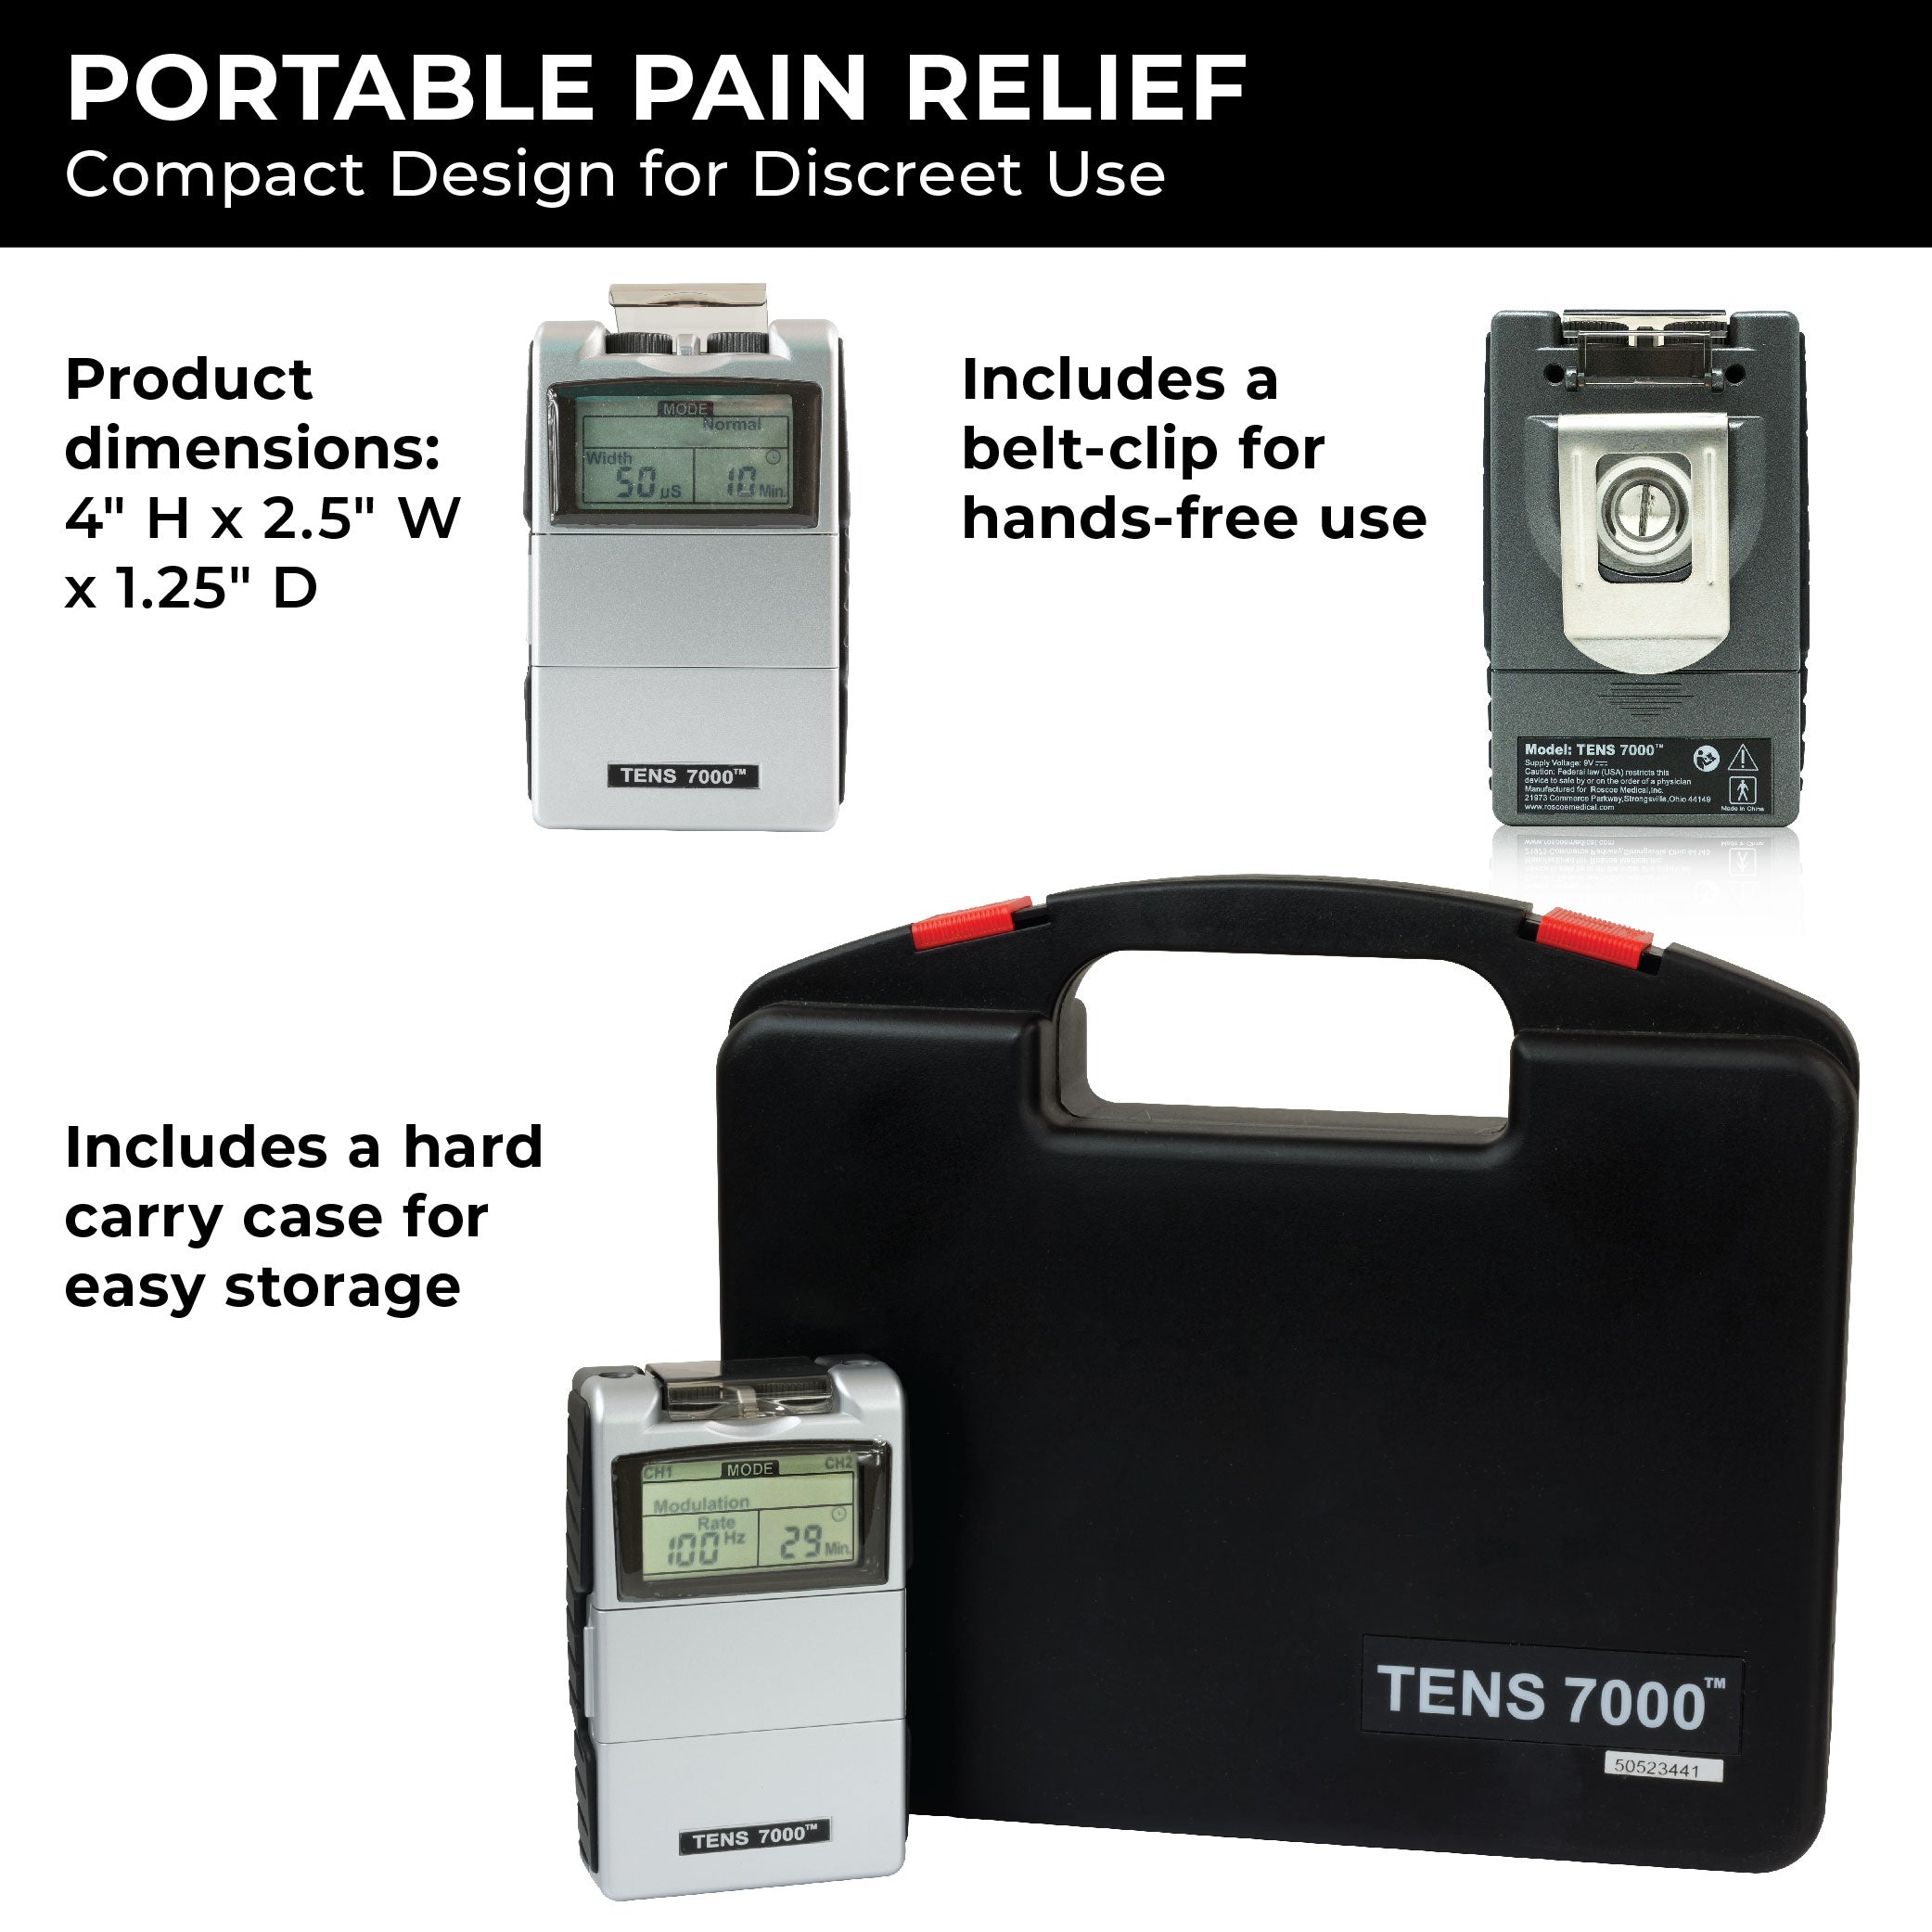 TENS 7000 2nd Edition Digital TENS Unit With Accessories - Carex Health Brands